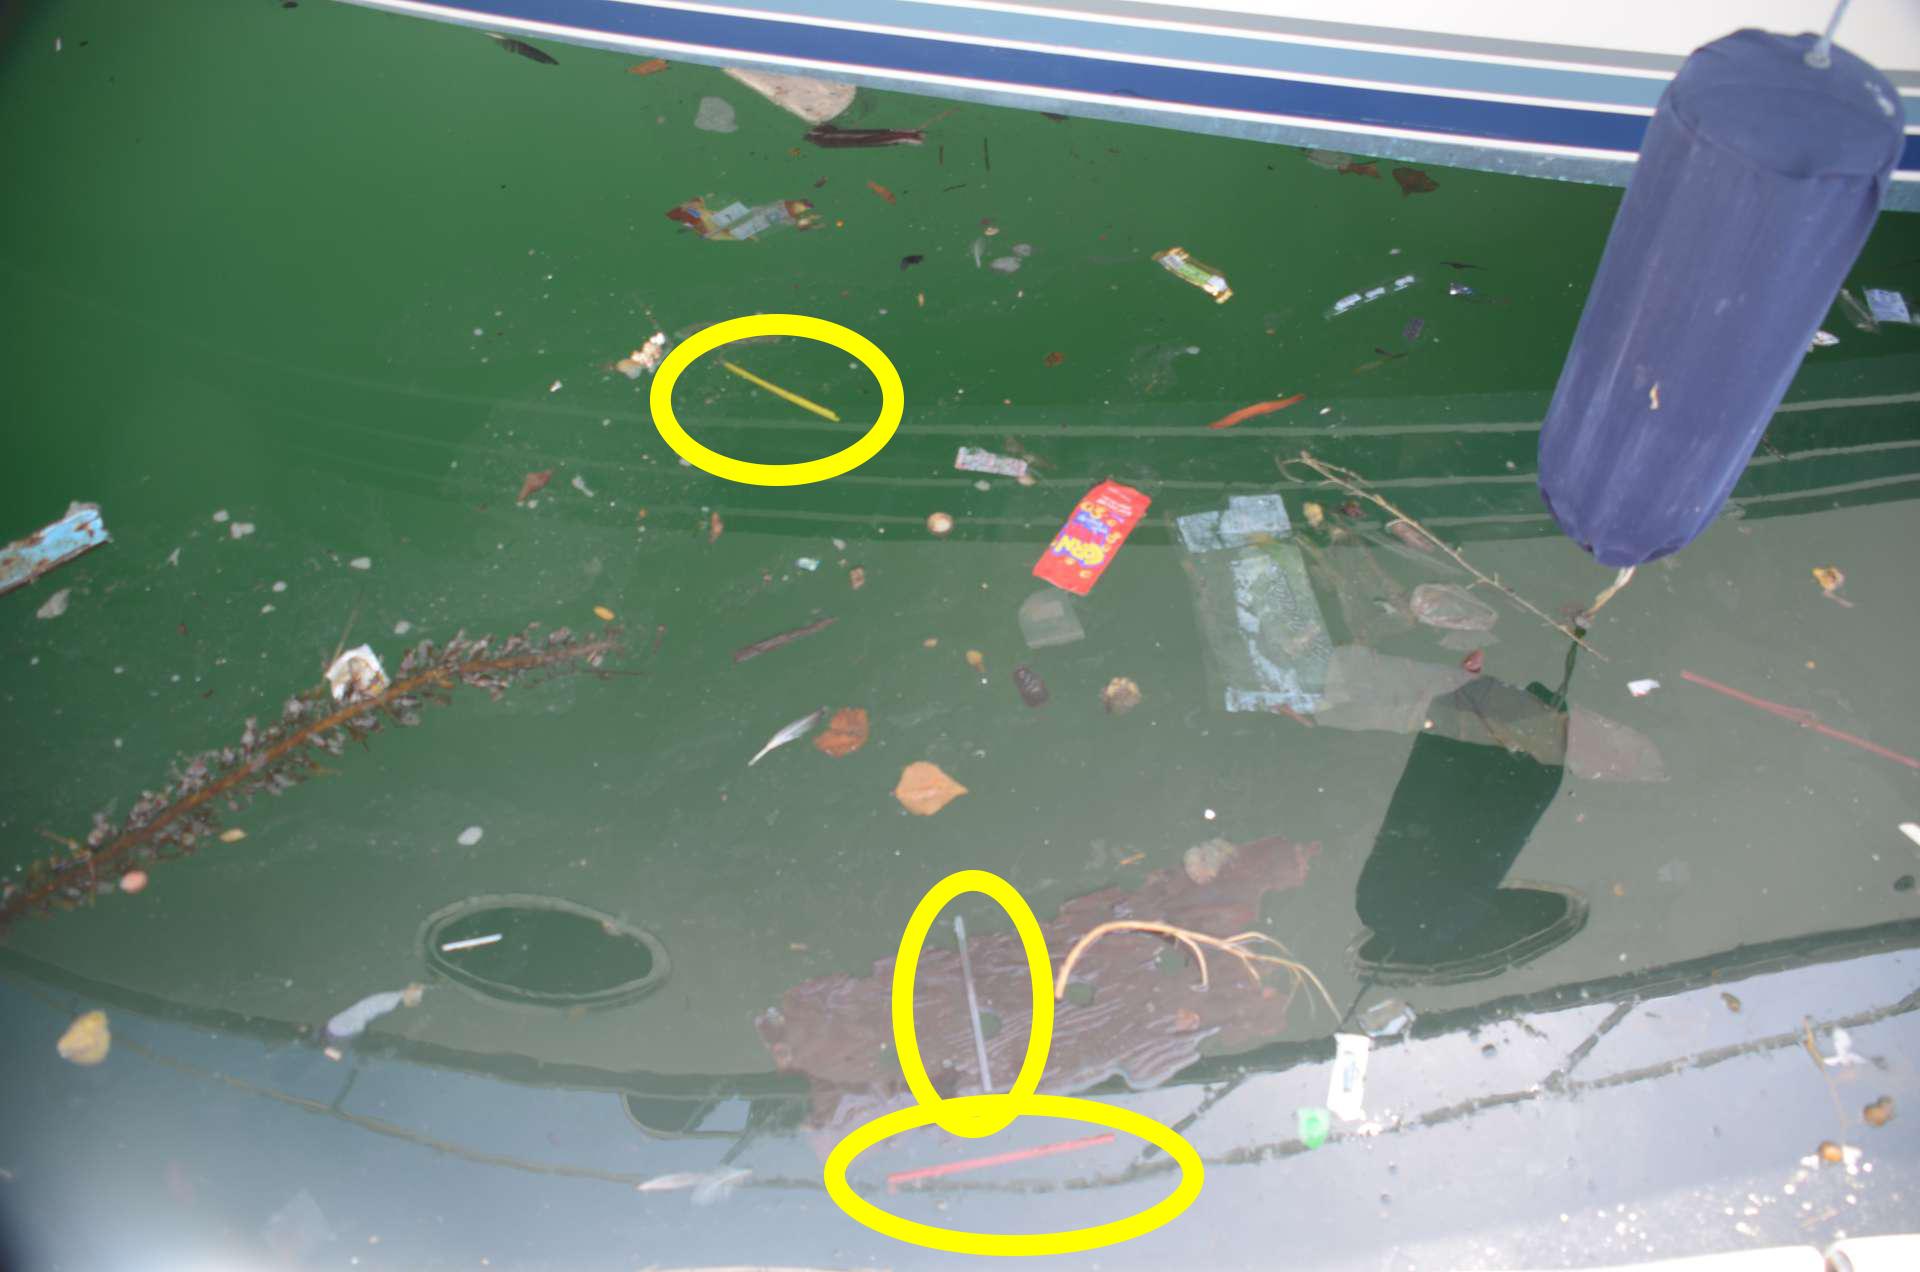 Ocean Defenders looks for plastic pollution in the ocean and removes it. See all the straws (in yellow circles)!